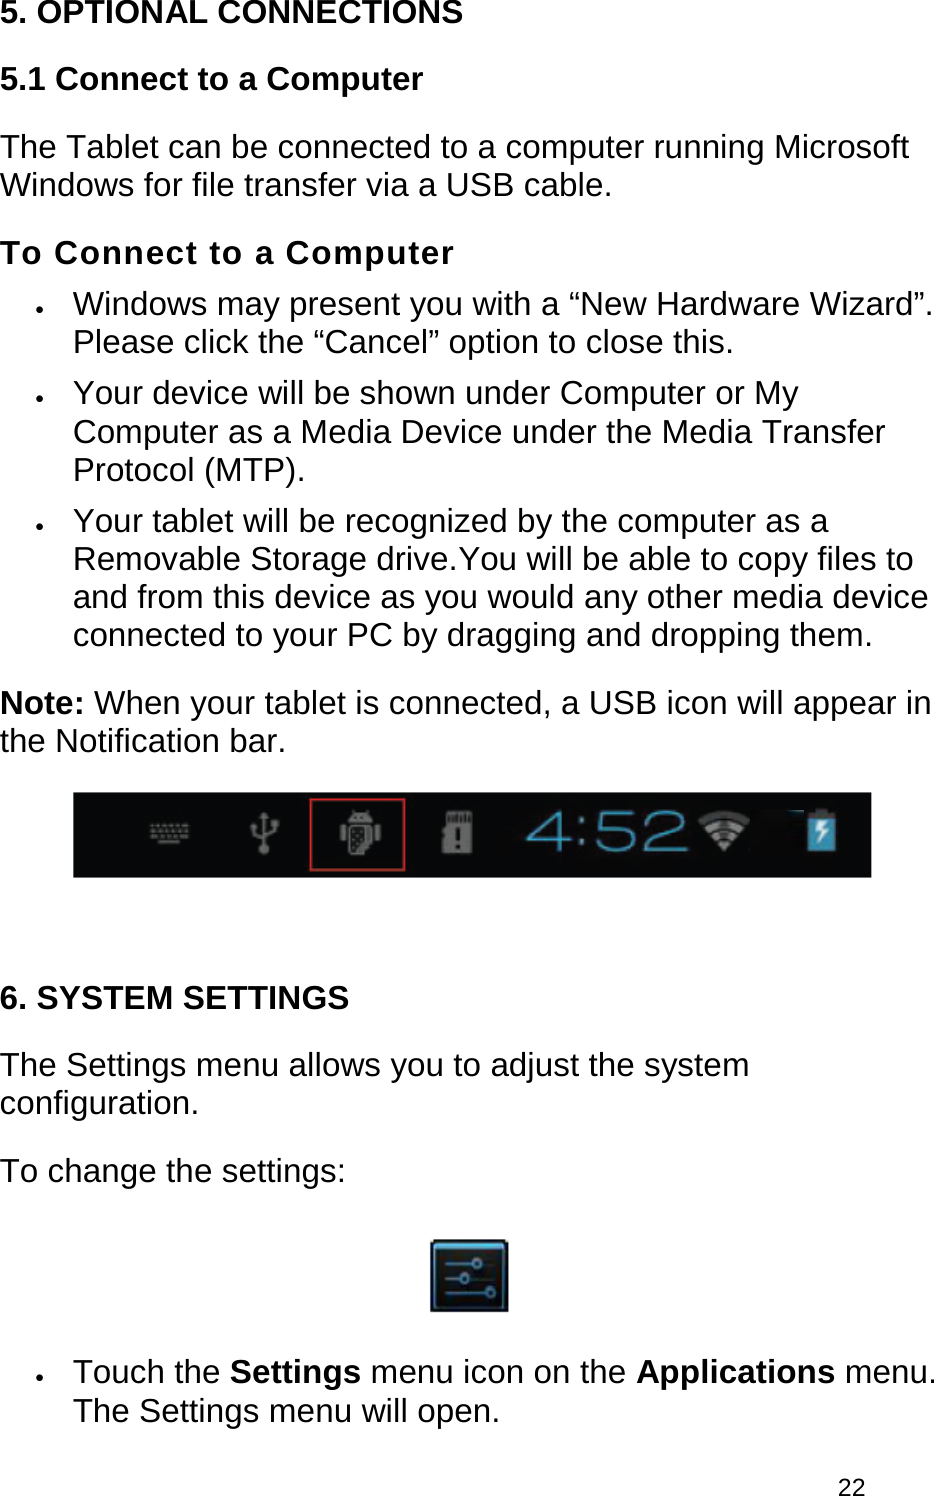 22 5. OPTIONAL CONNECTIONS5.1 Connect to a Computer The Tablet can be connected to a computer running Microsoft Windows for file transfer via a USB cable.  To Connect to a Computer •Windows may present you with a “New Hardware Wizard”.Please click the “Cancel” option to close this.•Your device will be shown under Computer or MyComputer as a Media Device under the Media TransferProtocol (MTP).•Your tablet will be recognized by the computer as aRemovable Storage drive.You will be able to copy files toand from this device as you would any other media deviceconnected to your PC by dragging and dropping them.Note: When your tablet is connected, a USB icon will appear in the Notification bar. 6. SYSTEM SETTINGSThe Settings menu allows you to adjust the system configuration.  To change the settings: •Touch the Settings menu icon on the Applications menu.The Settings menu will open.